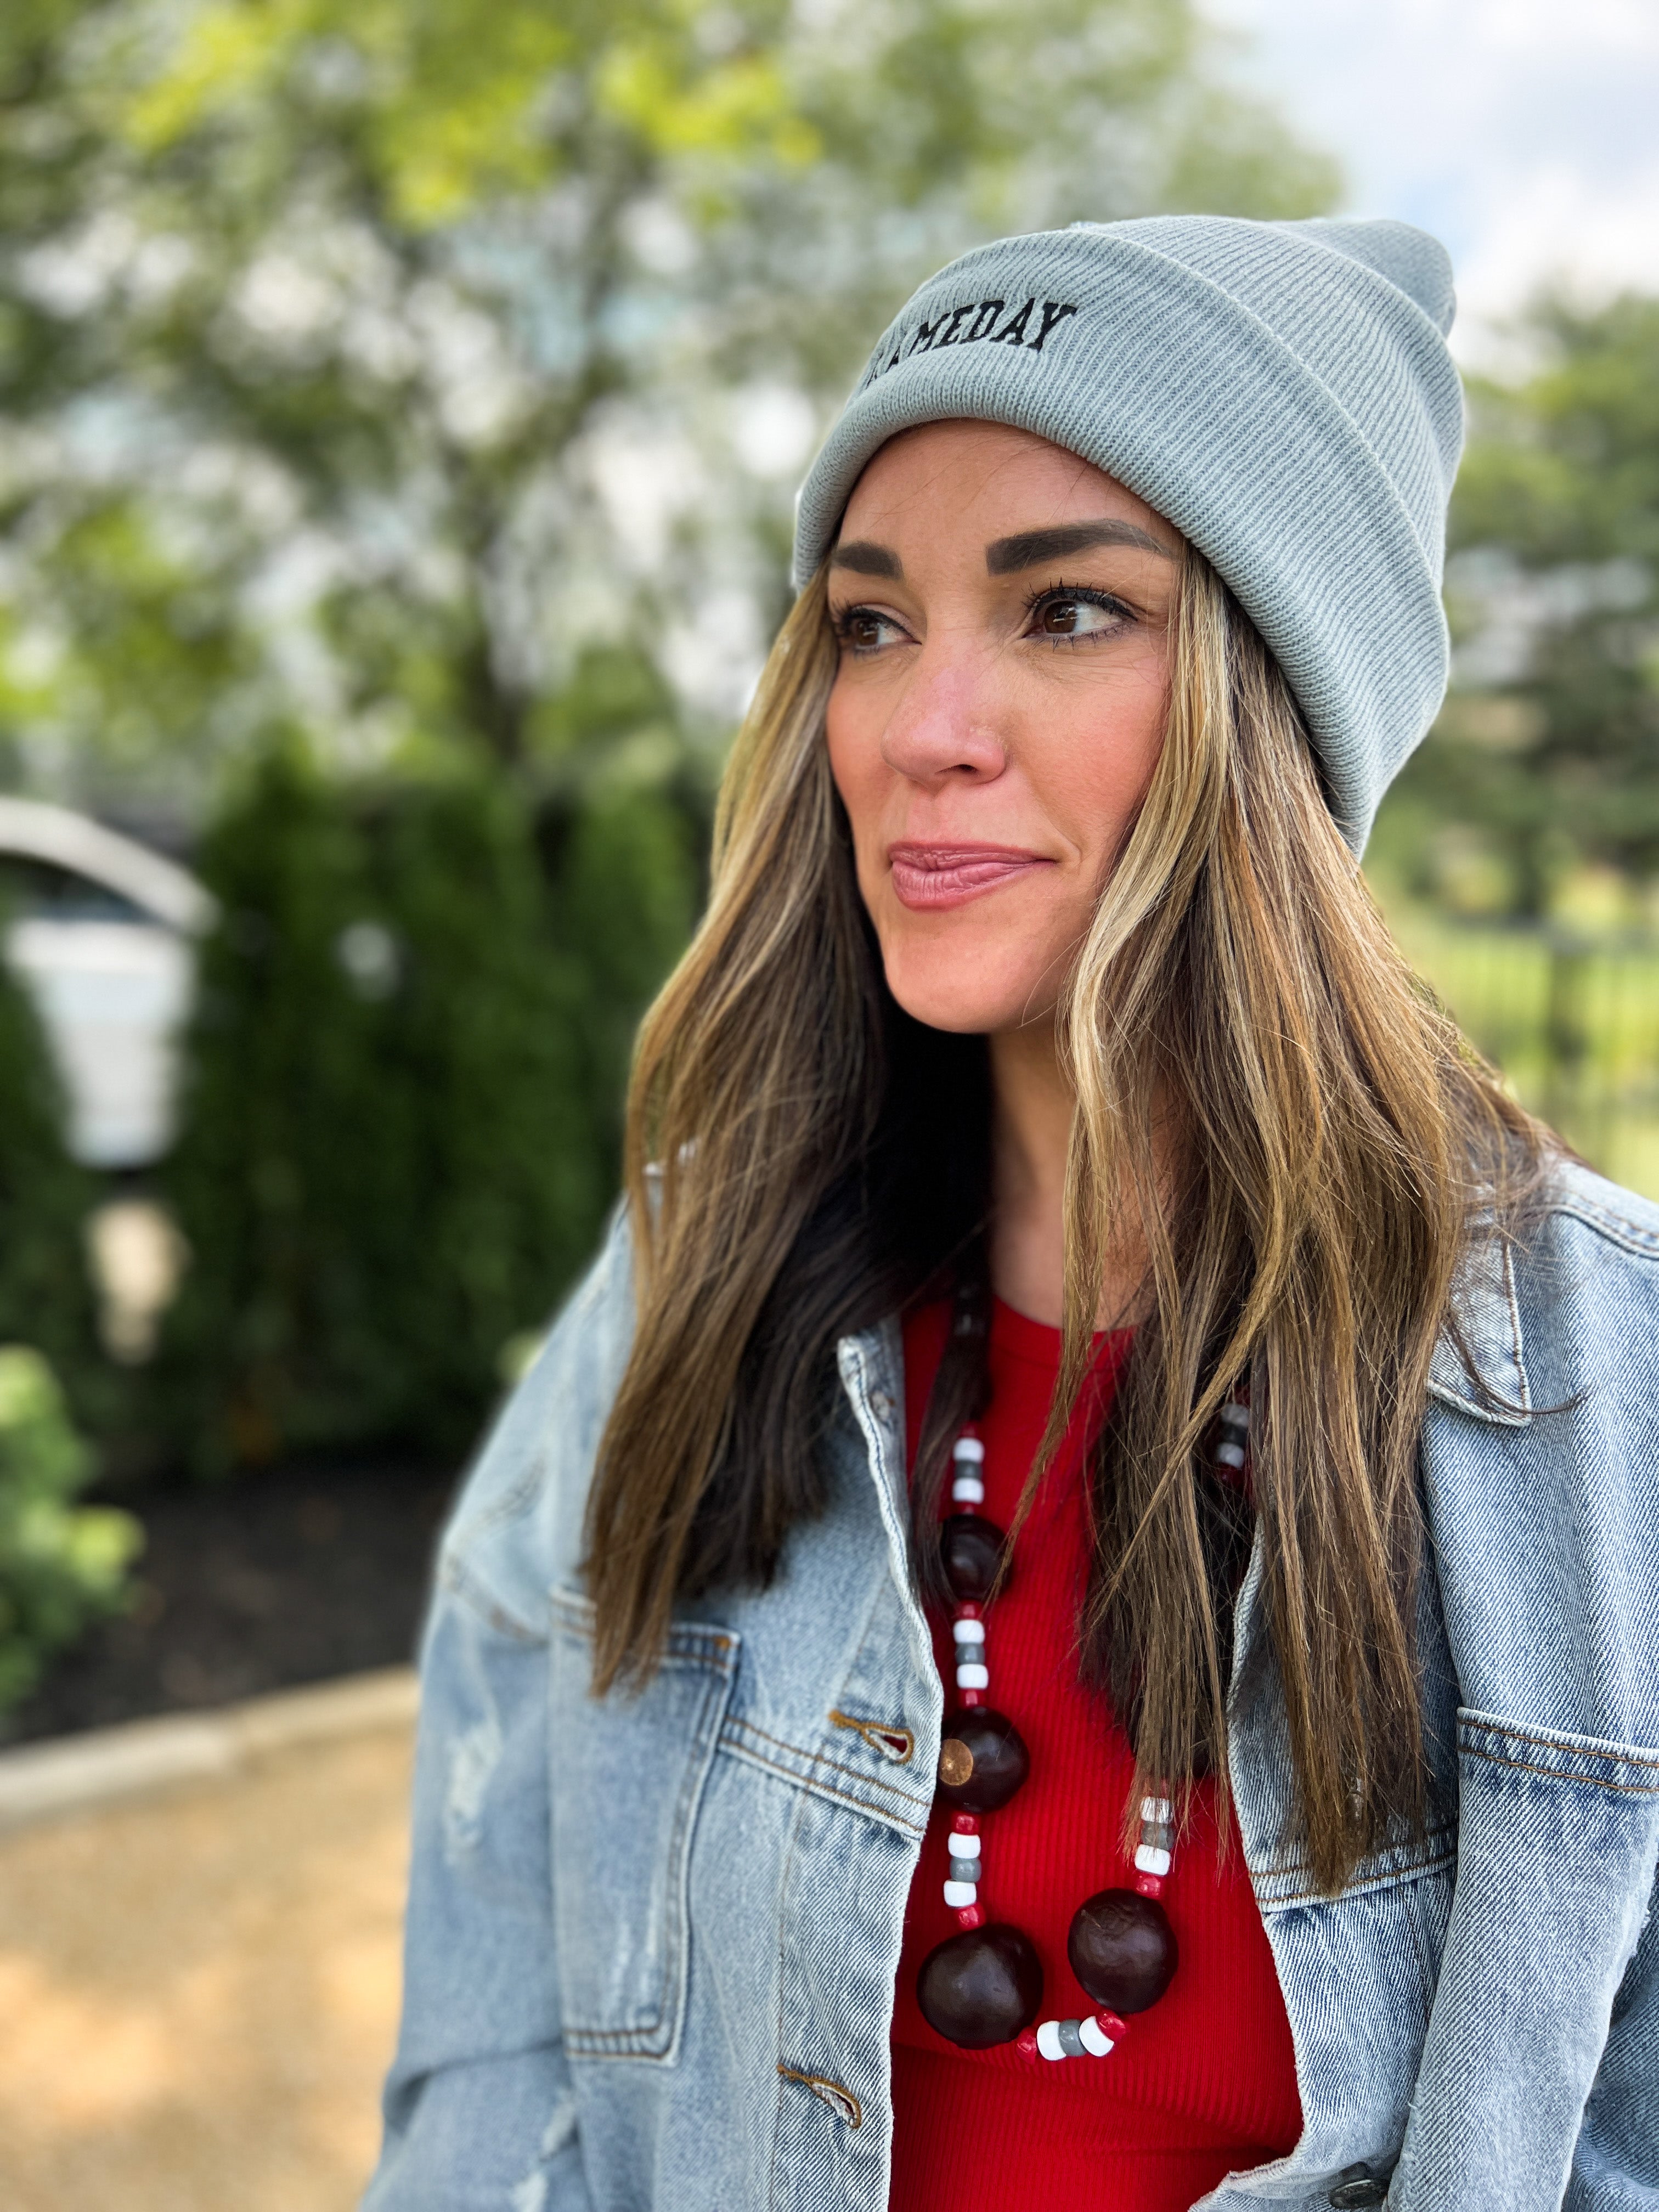 The Challenge Embroidered Beanie